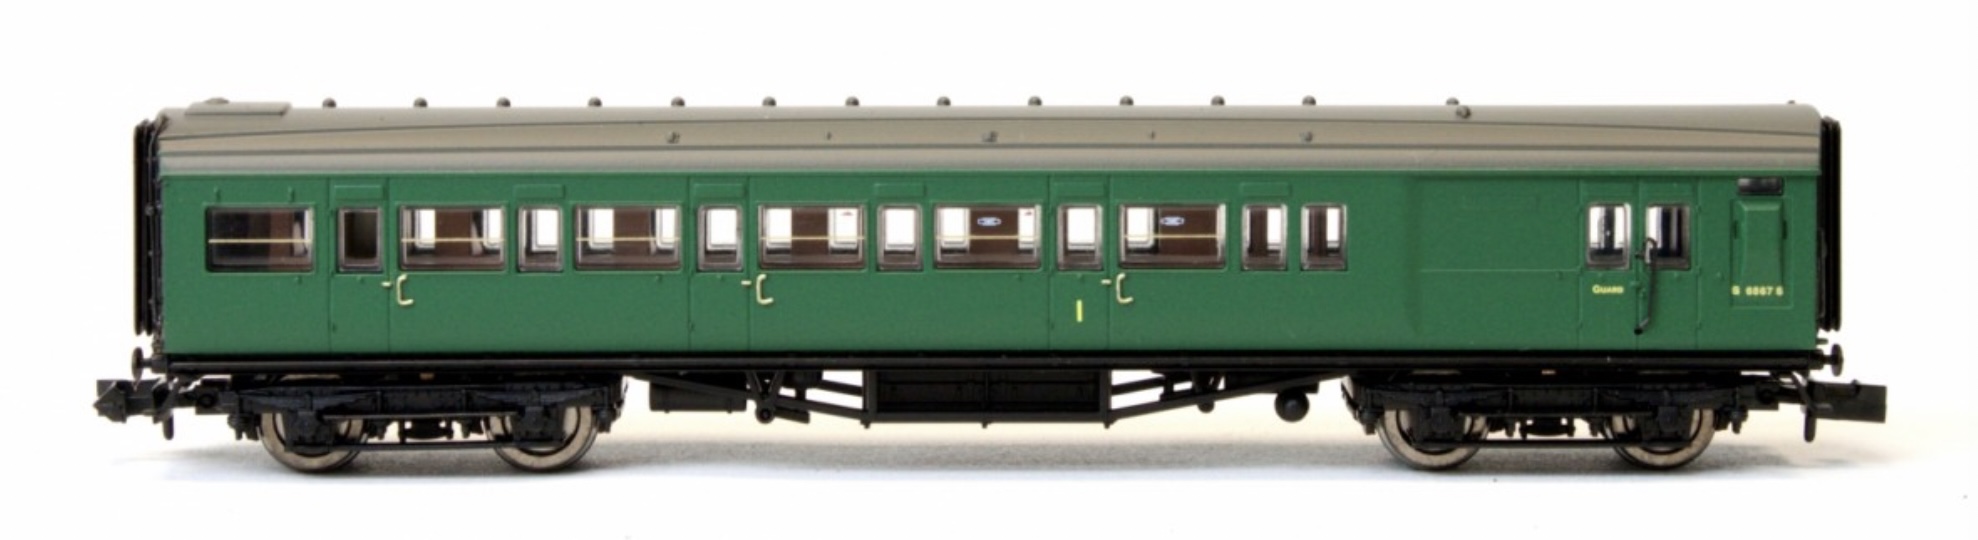 N Scale - Dapol - 2P-012-375 - Passenger Car, Coach, Maunsell, Composite - Southern (UK) - 6567